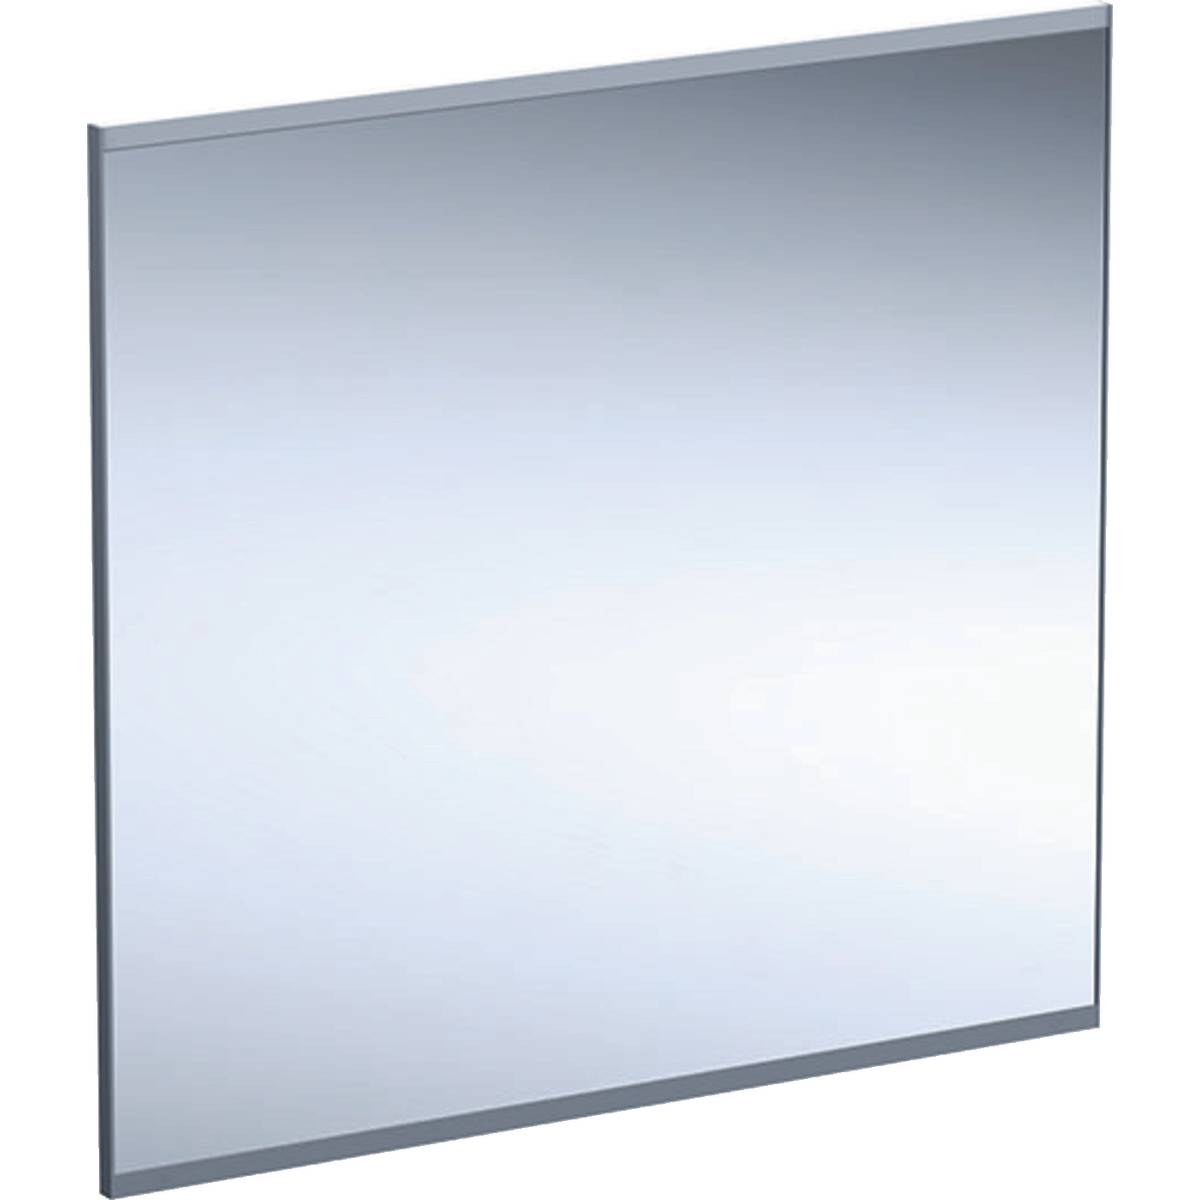 Option Plus illuminated mirror with direct and indirect lighting